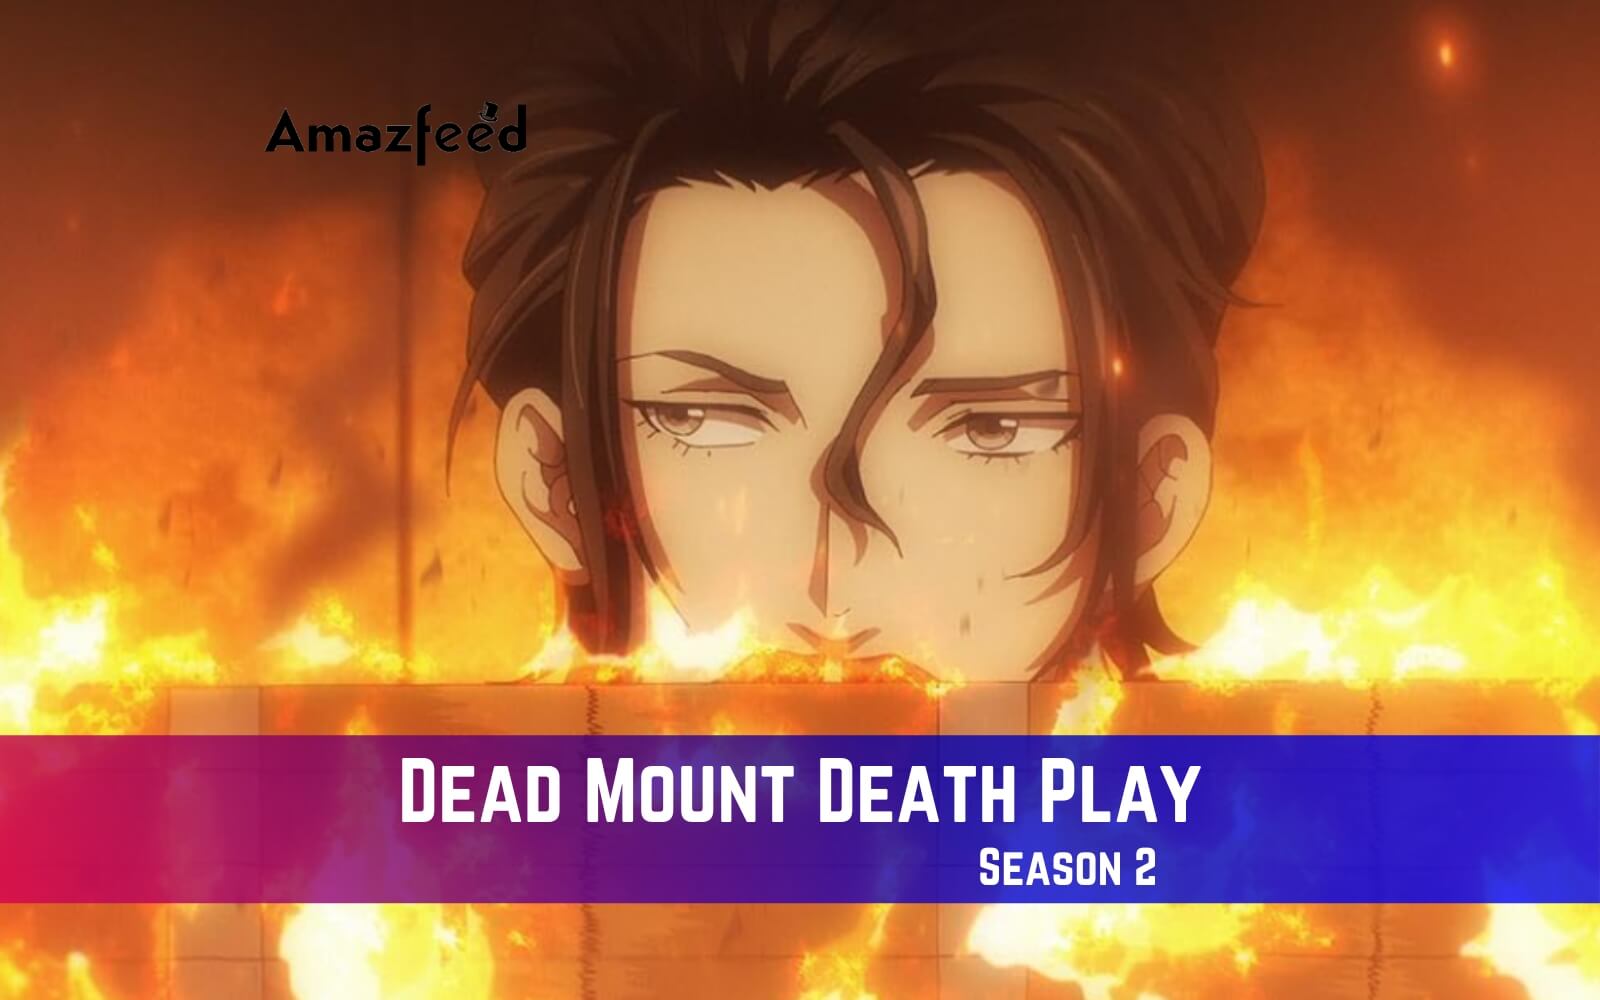 Dead Mount Death Play part 2 confirms release window with new key